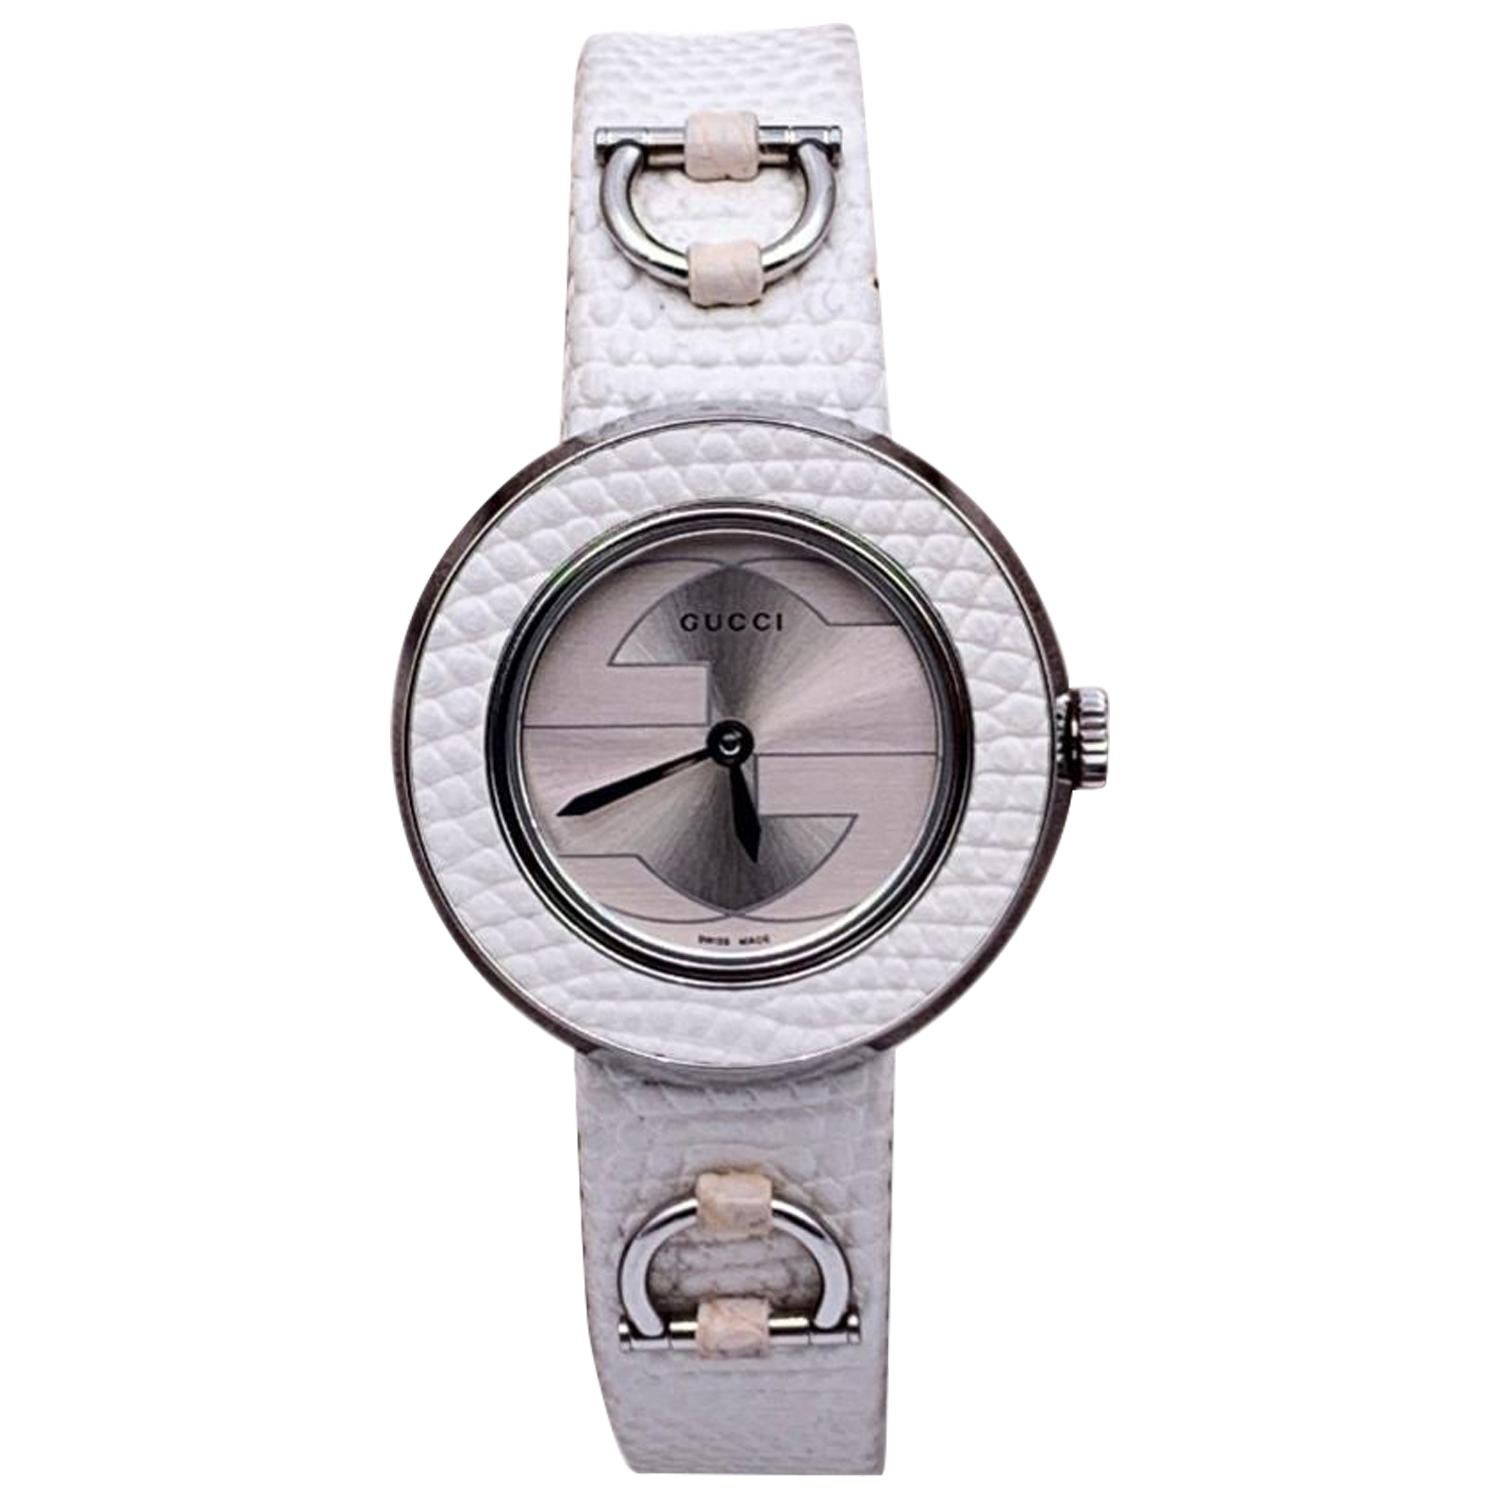 Gucci White Leather Stainless Steel 129.5 Quartz Wrist Watch at 1stDibs